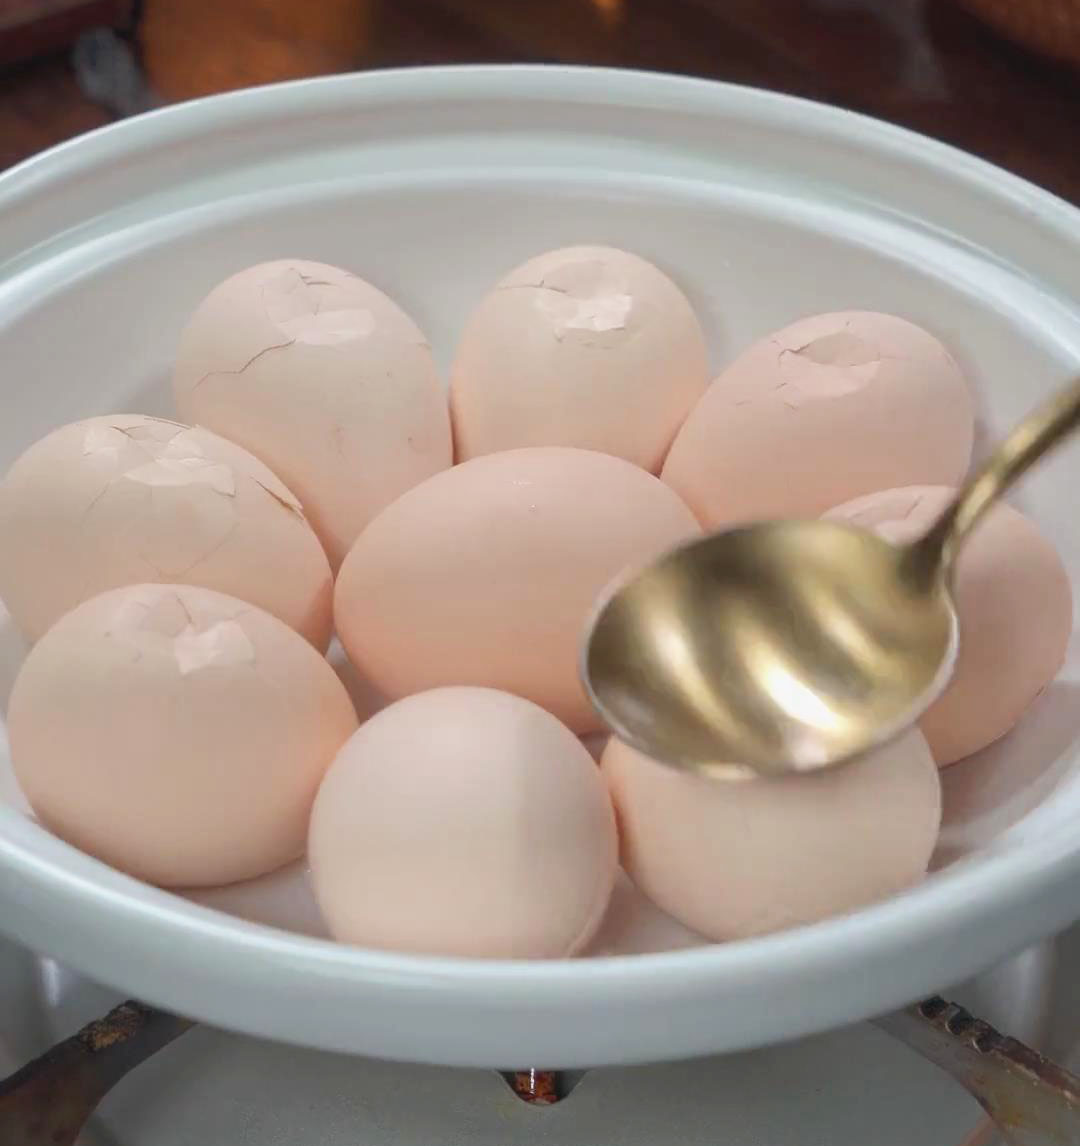 gently crack the eggshells using the back of the spoon